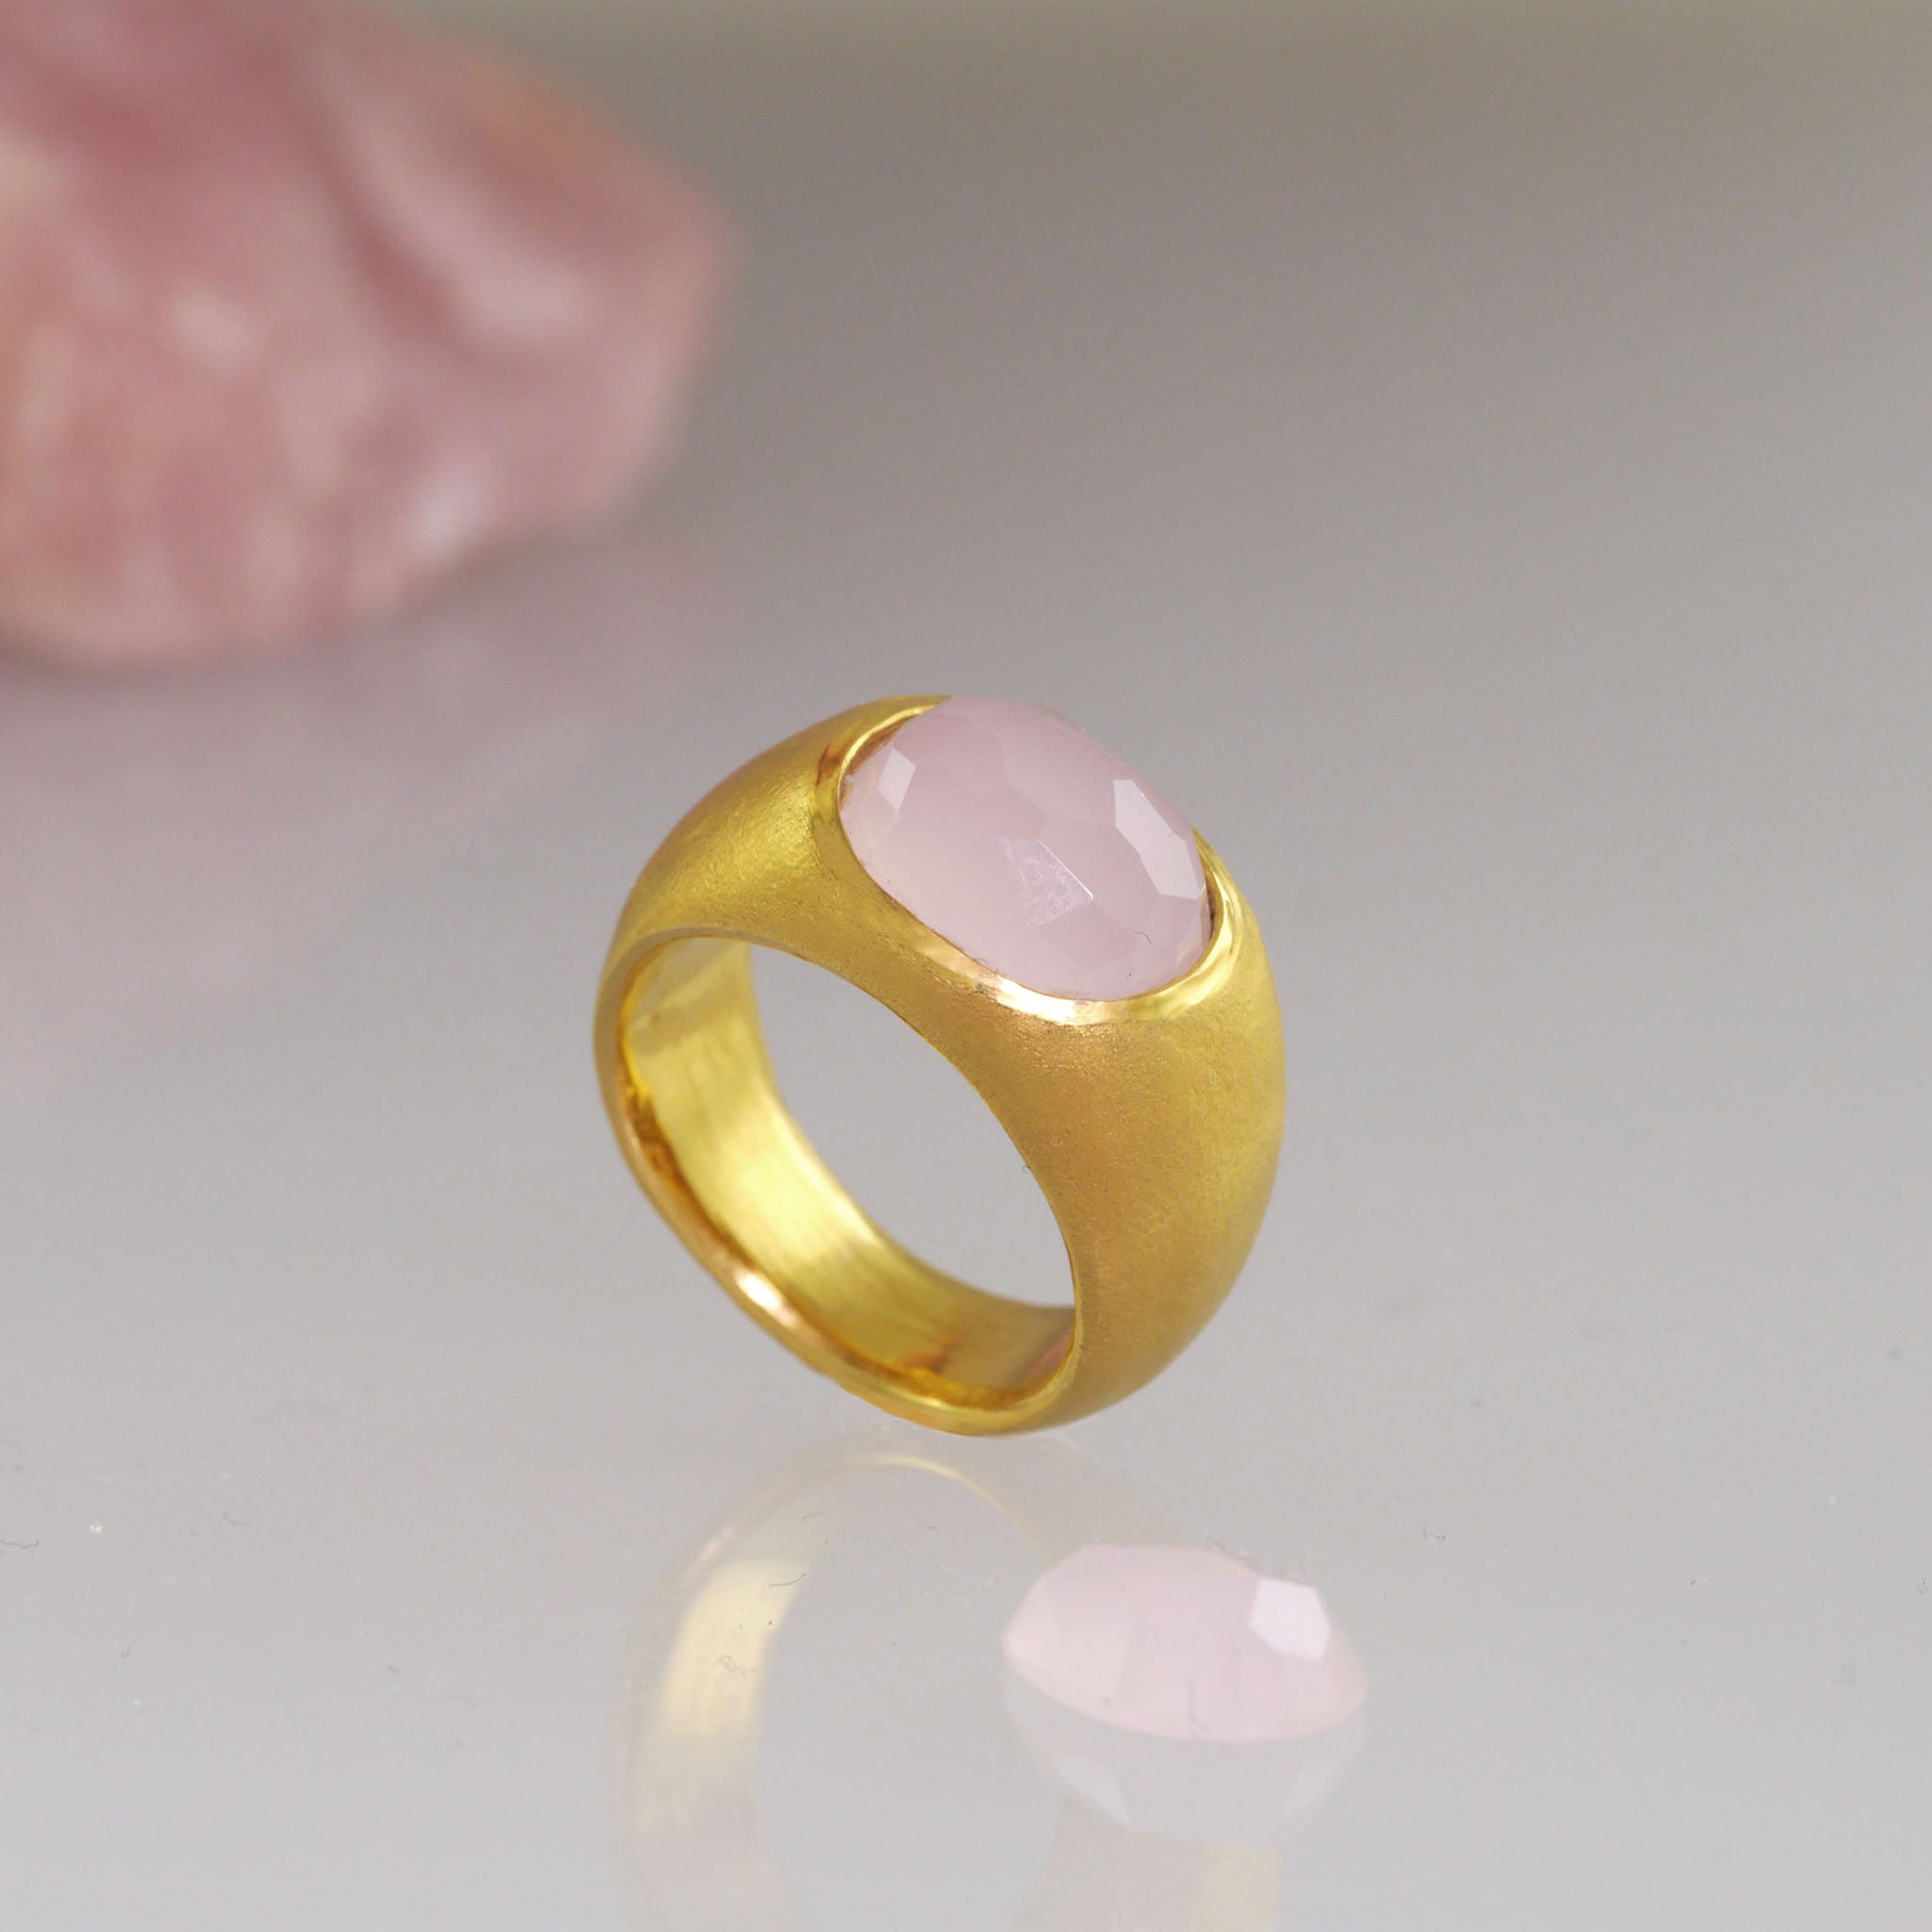 A timeless gold oval ring adorned with a captivating Rose Quartz gemstone. This classic piece exudes traditional elegance and is beloved for its enduring appeal.